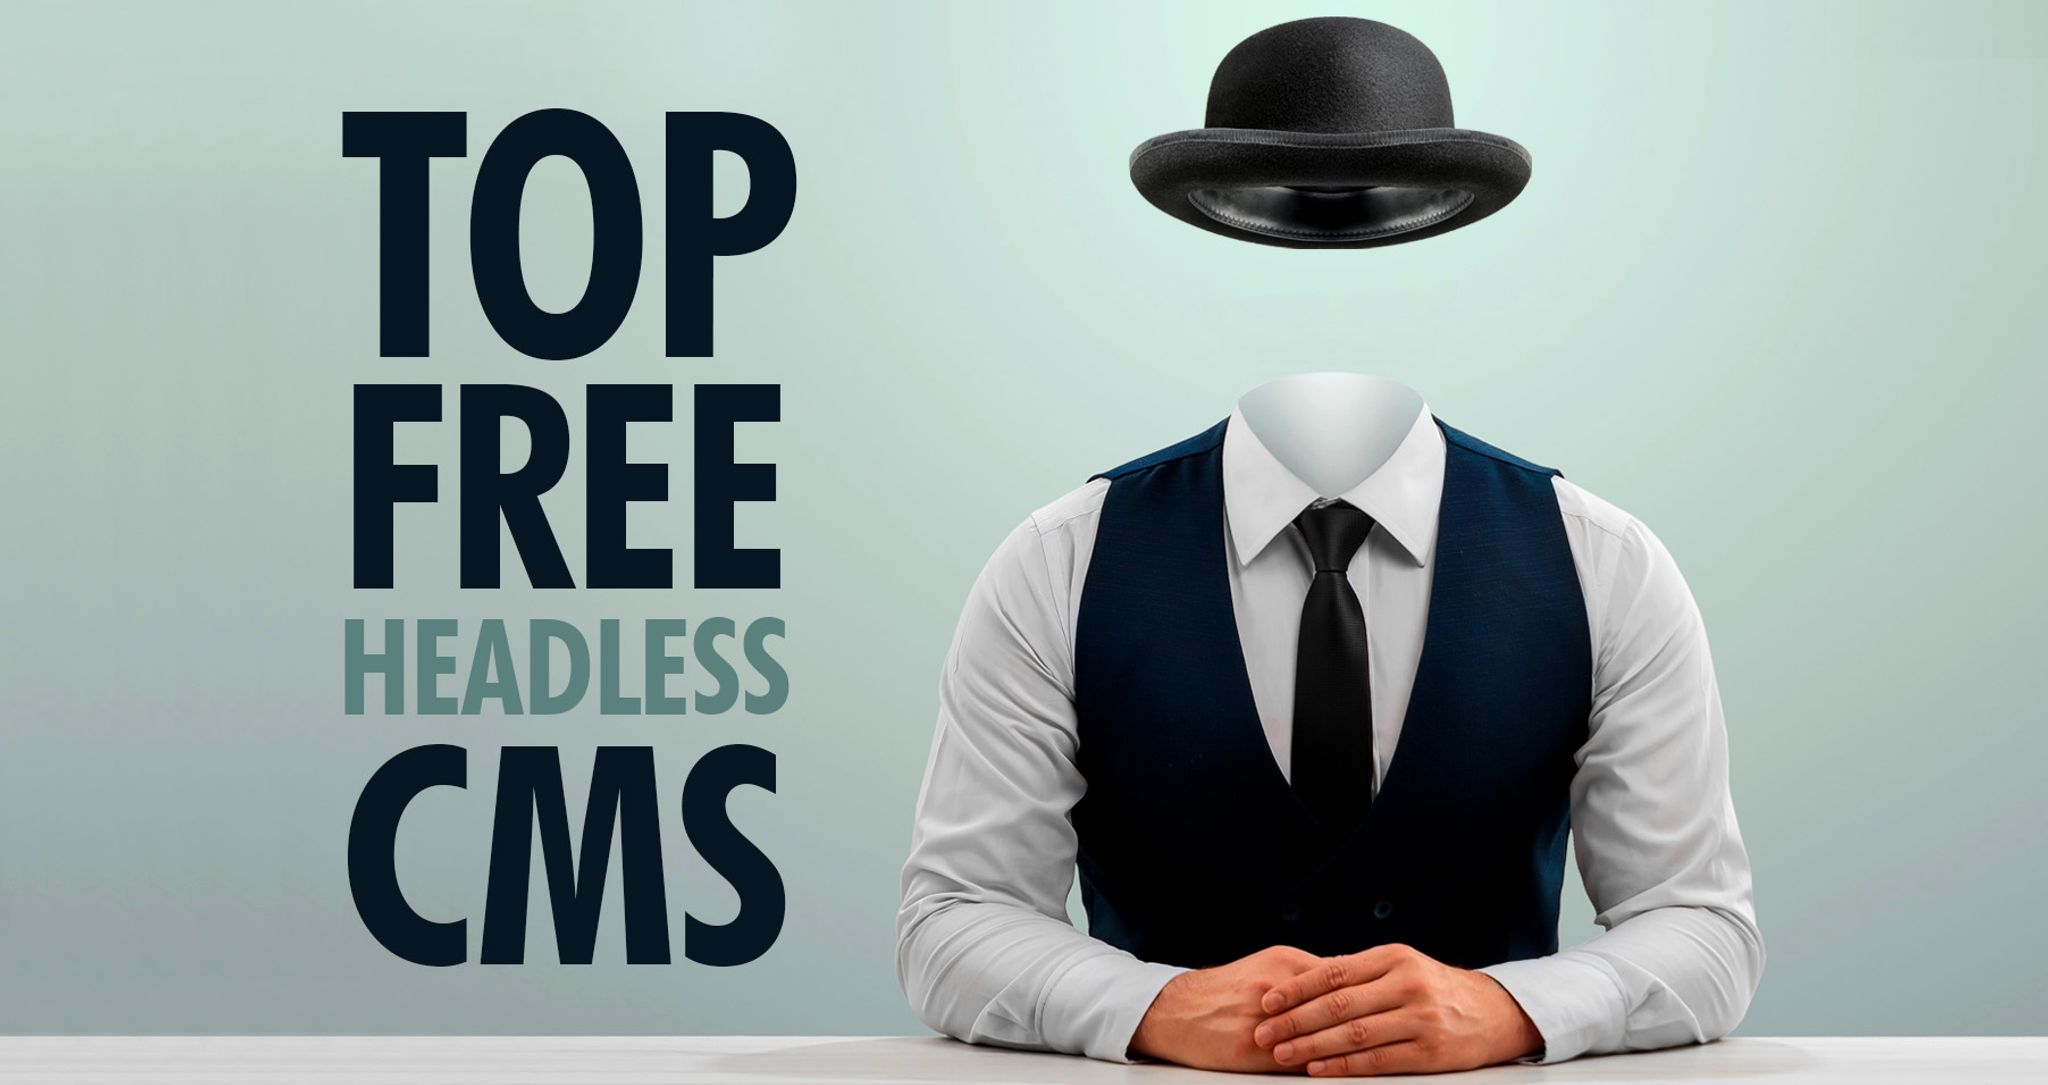 Image of man without head, hat floating above empty area would head would be. Text reads "Top Free Headless CMS"